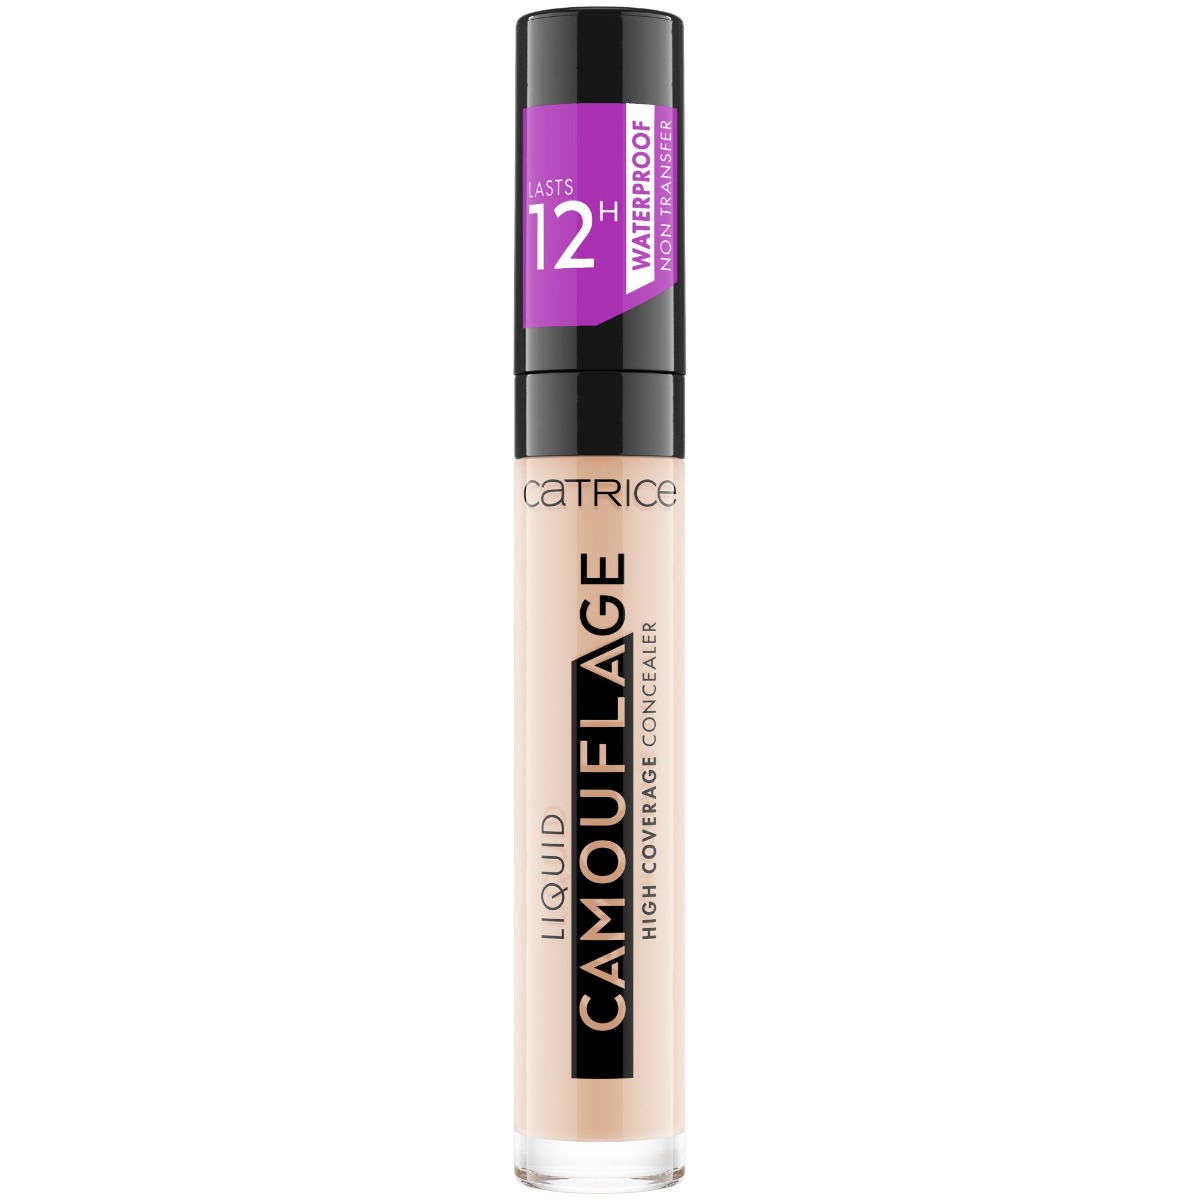 Corector Liquid Camouflage High Coverage Concealer 005 - Light Natural, 5ml, Catrice